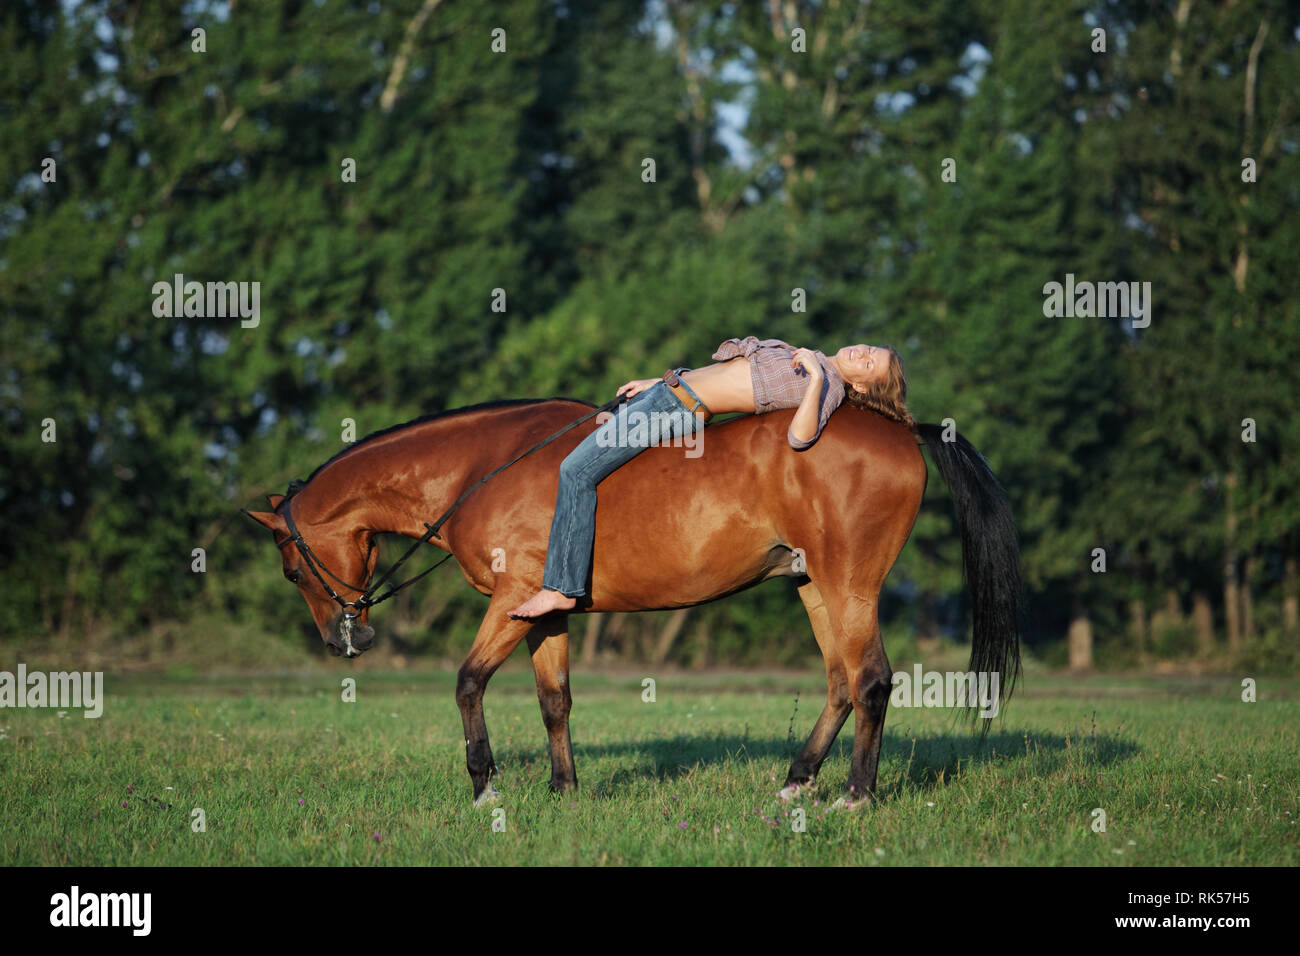 Beautiful cowgirl bareback ride her horse in woods glade at sunset Stock Photo